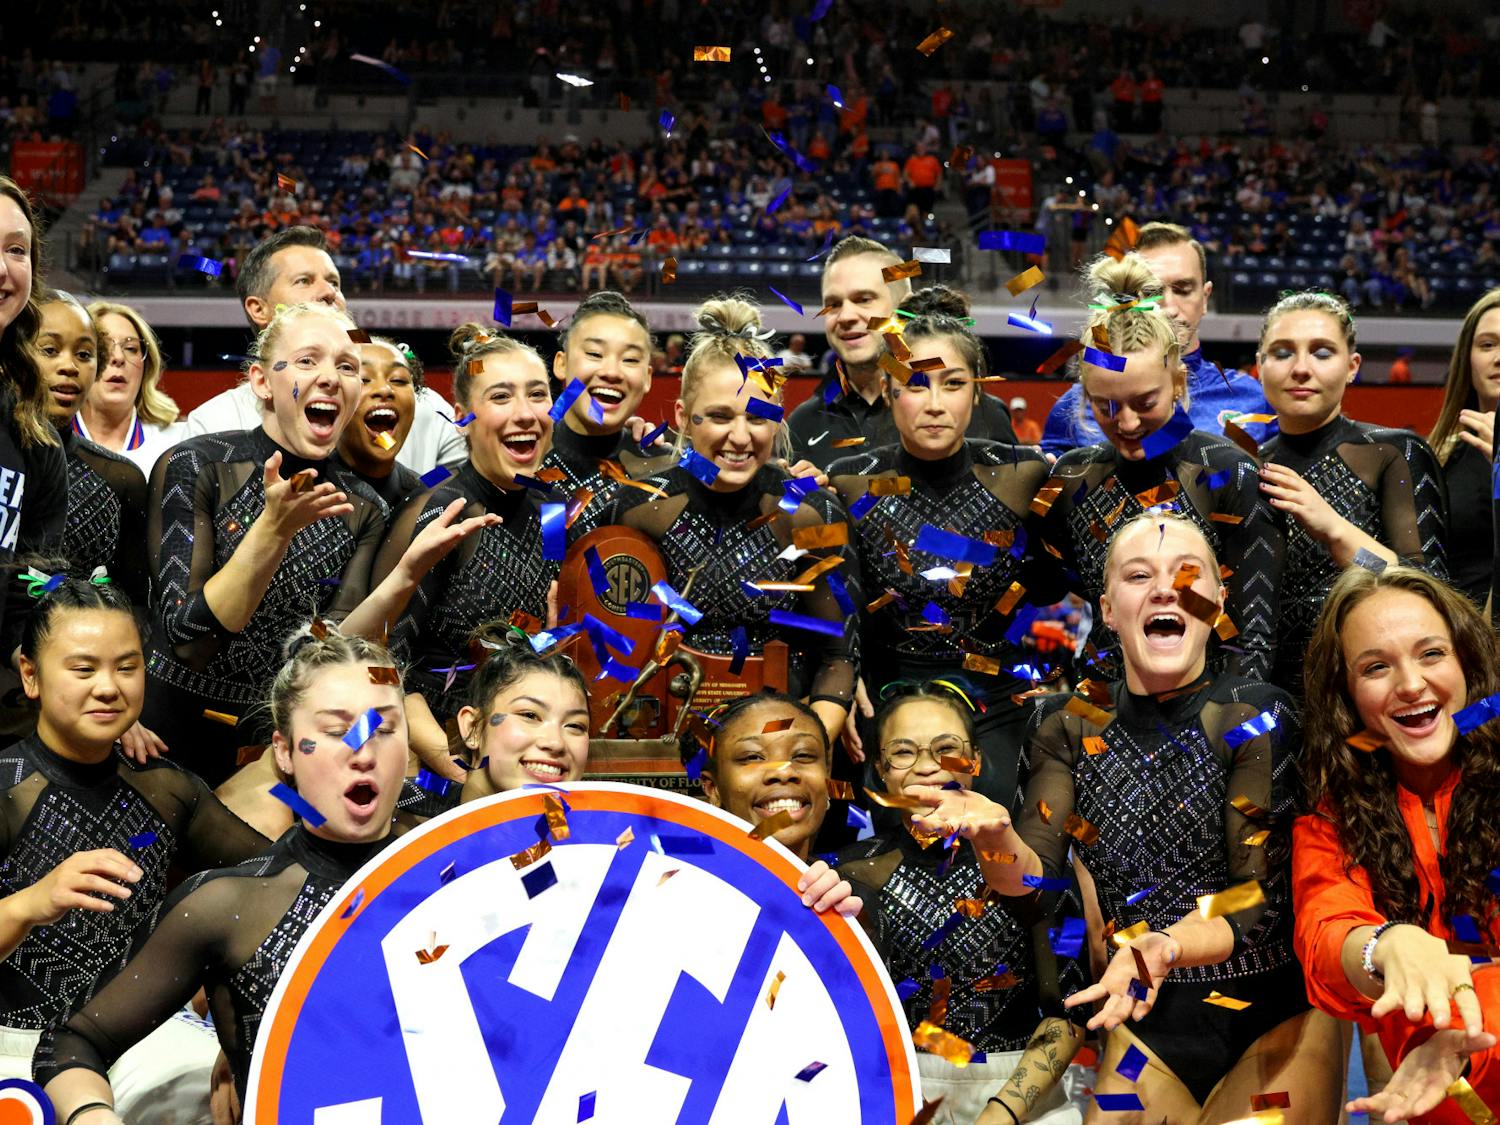 The Florida Gators gymnastics team celebrates its Southeastern Conference championship win following its victory against the Kentucky Wildcats Friday, Feb. 24, 2023.